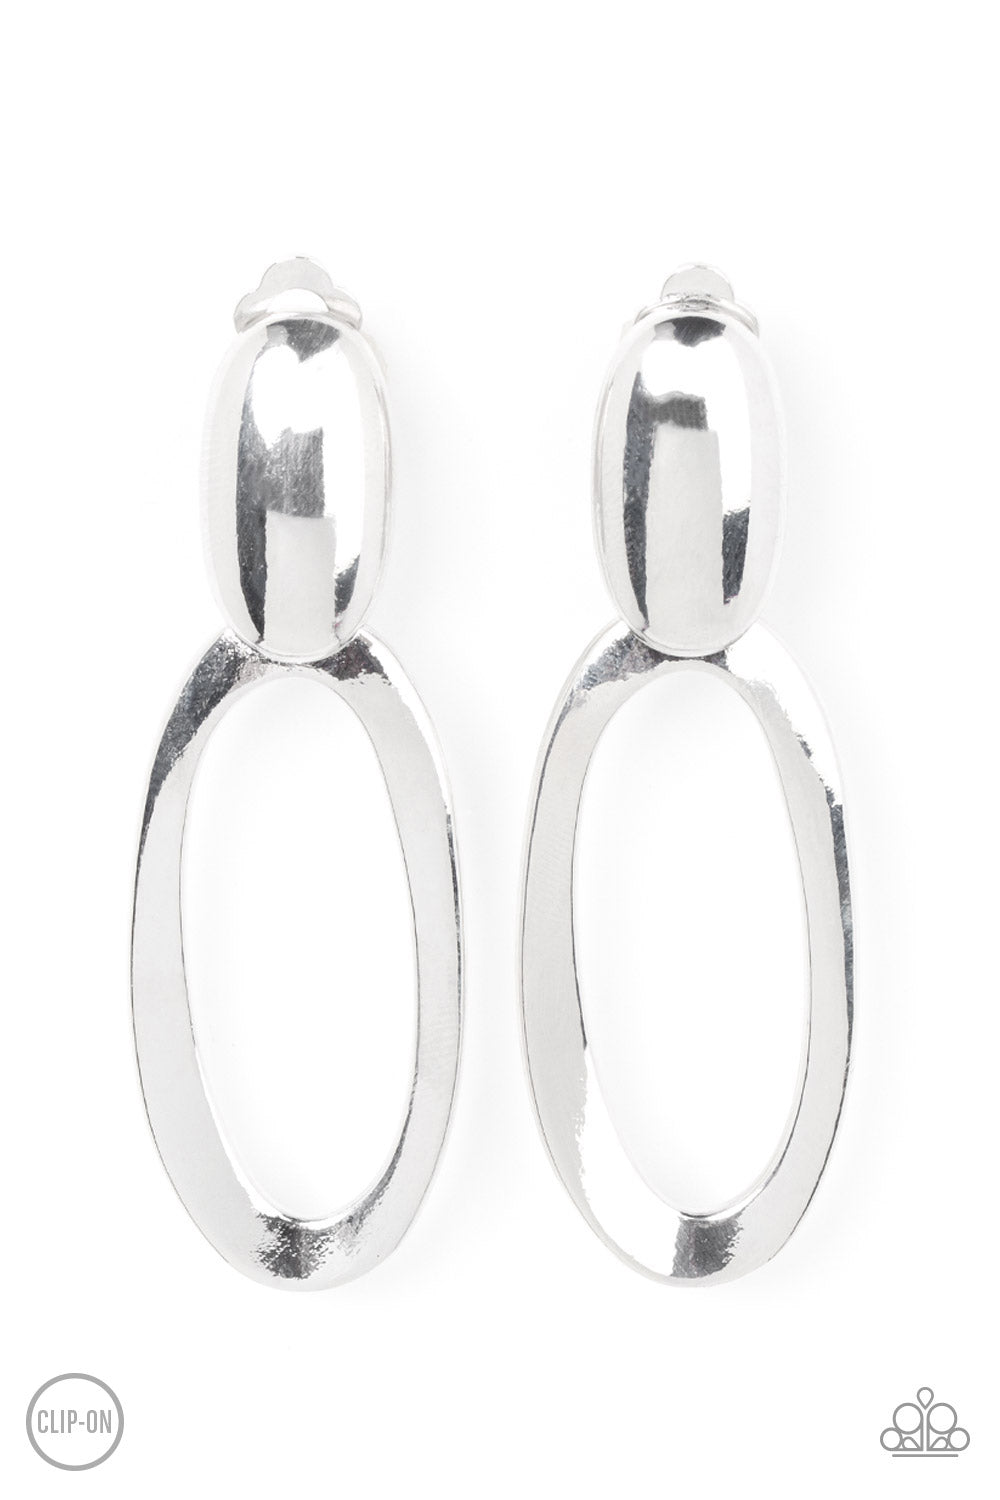 An asymmetrical silver oval hinges from the bottom of a spherical silver oval fitting, resulting in a radiant lure. Earring attaches to a standard clip-on fitting.  Sold as one pair of clip-on earrings.   Clip On Earring